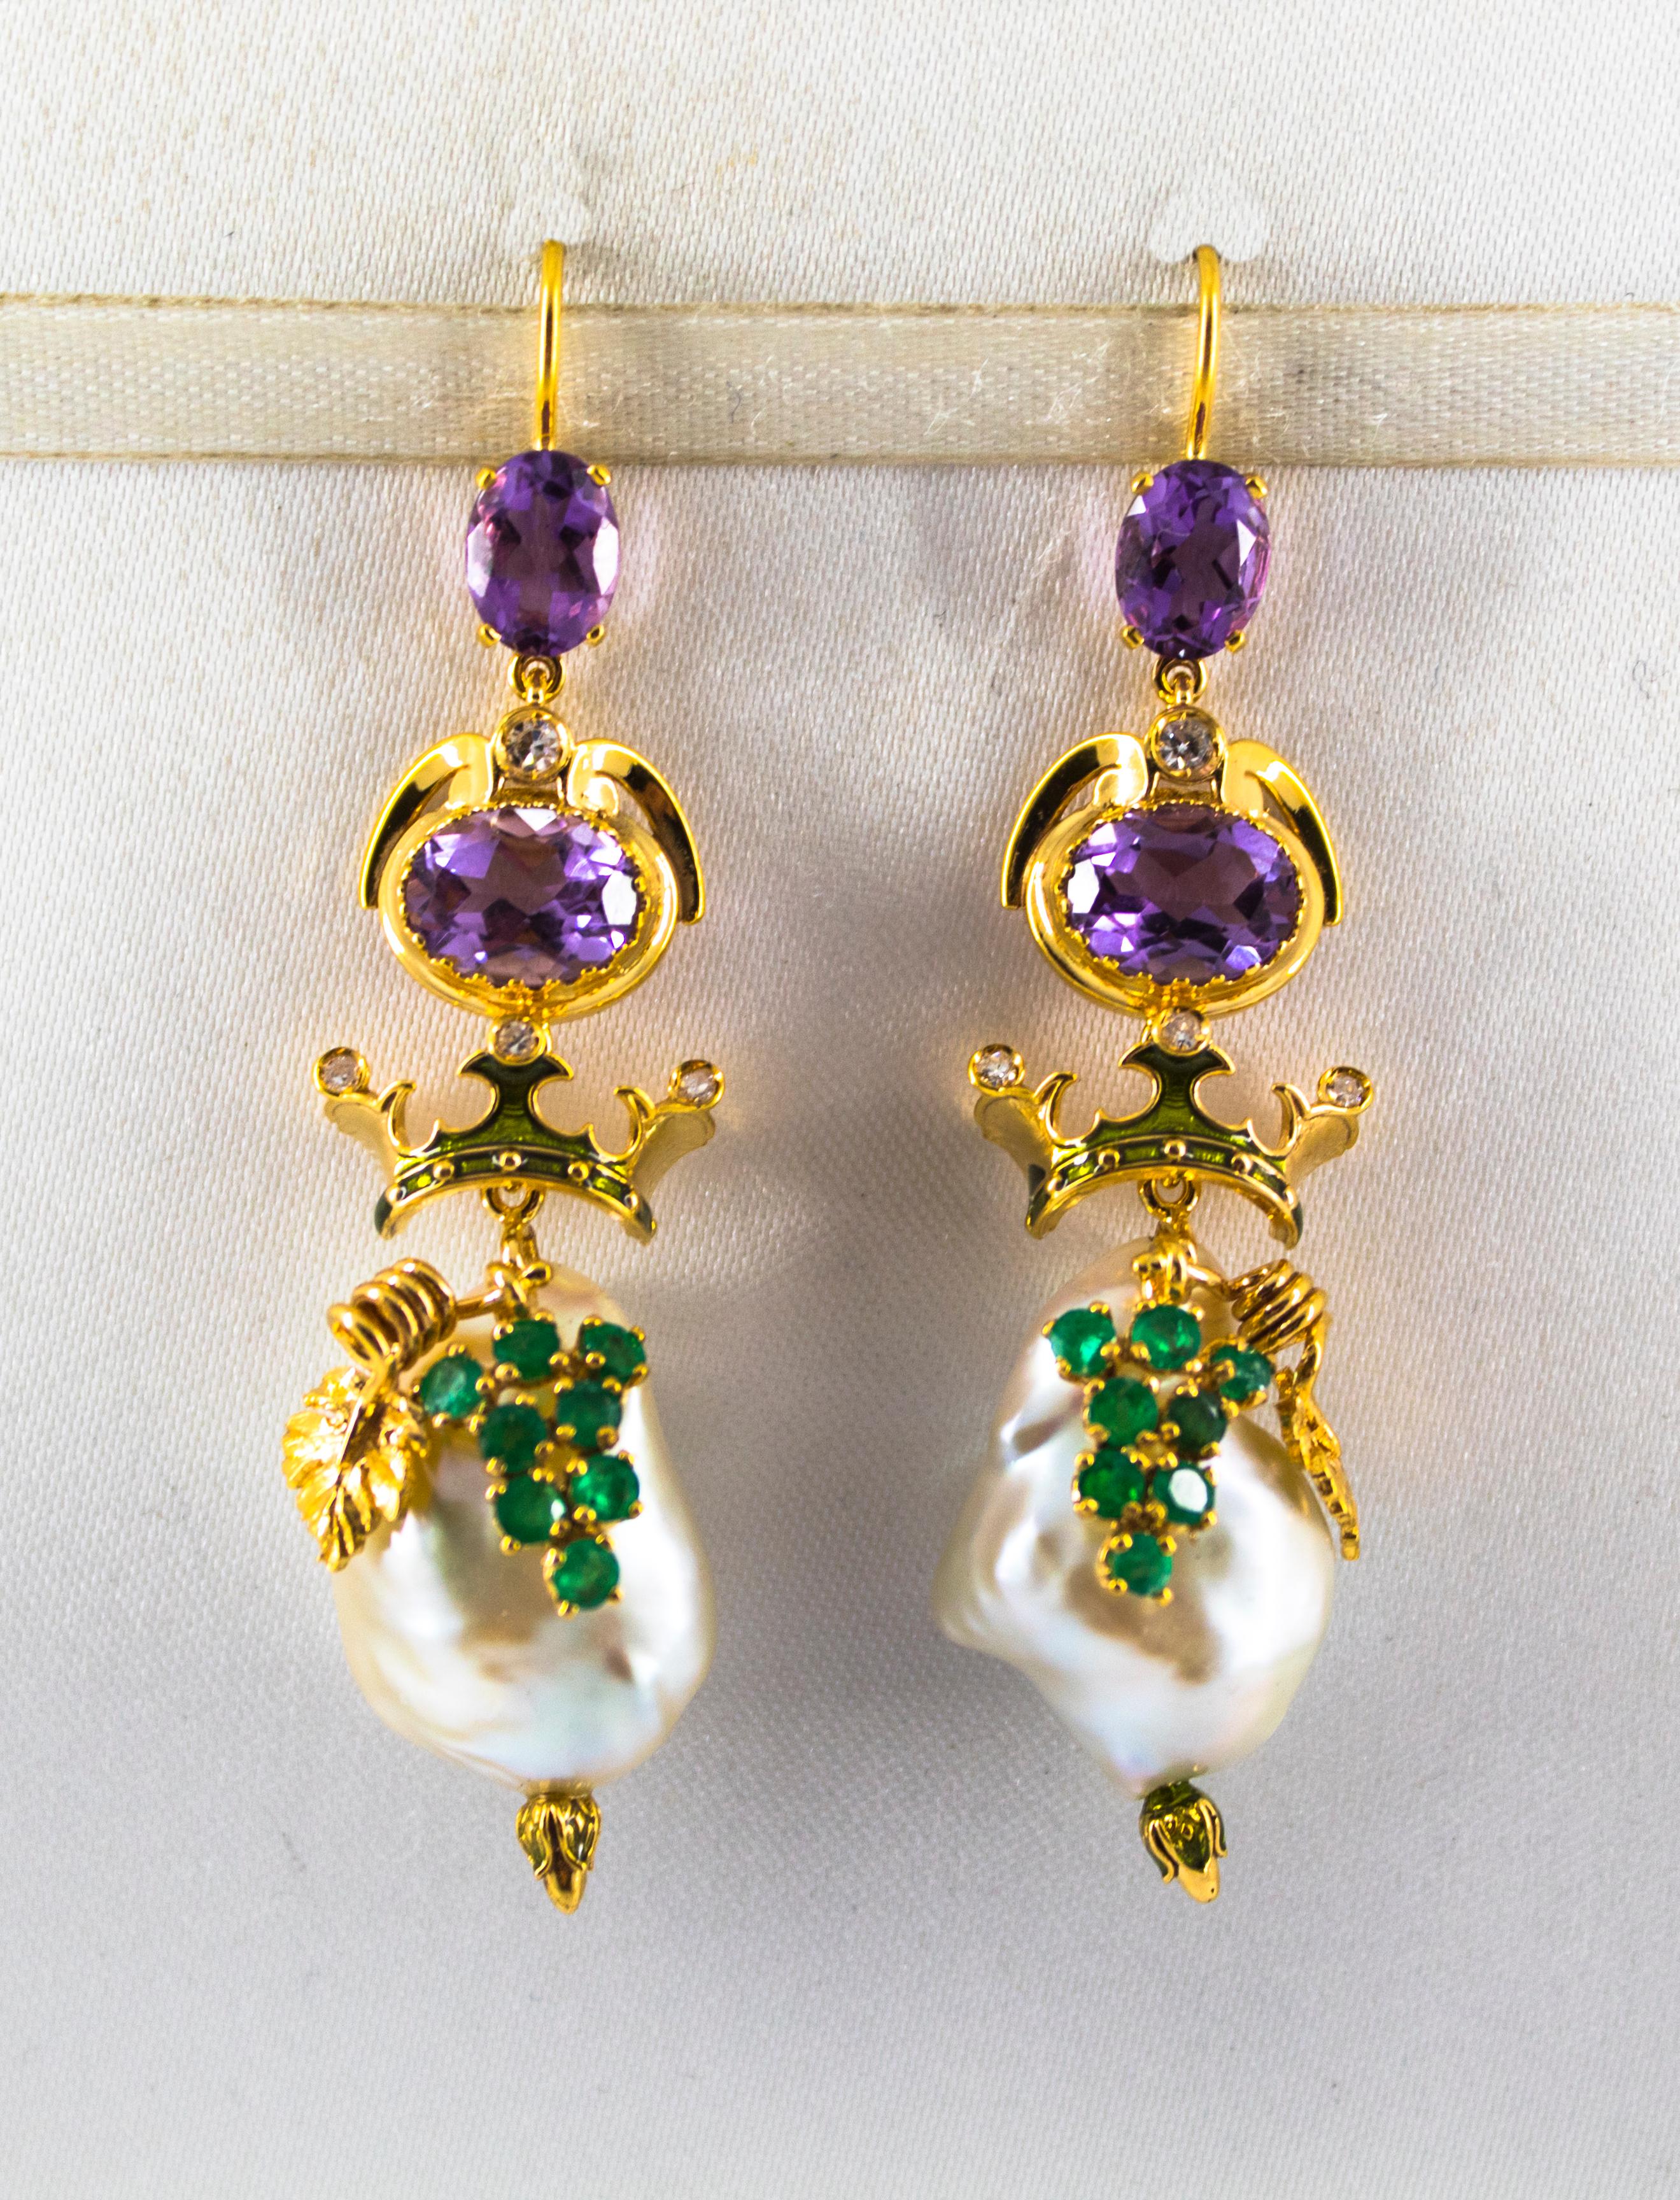 These Stud Earrings are made of 14K Yellow Gold.
These Earrings have 0.16 Carats of White Diamonds.
These Earrings have 0.90 Carats of Emeralds.
These Earrings have 1.80 Carats of Amethyst.
These Earrings have also Pearls and Enamel.
All our